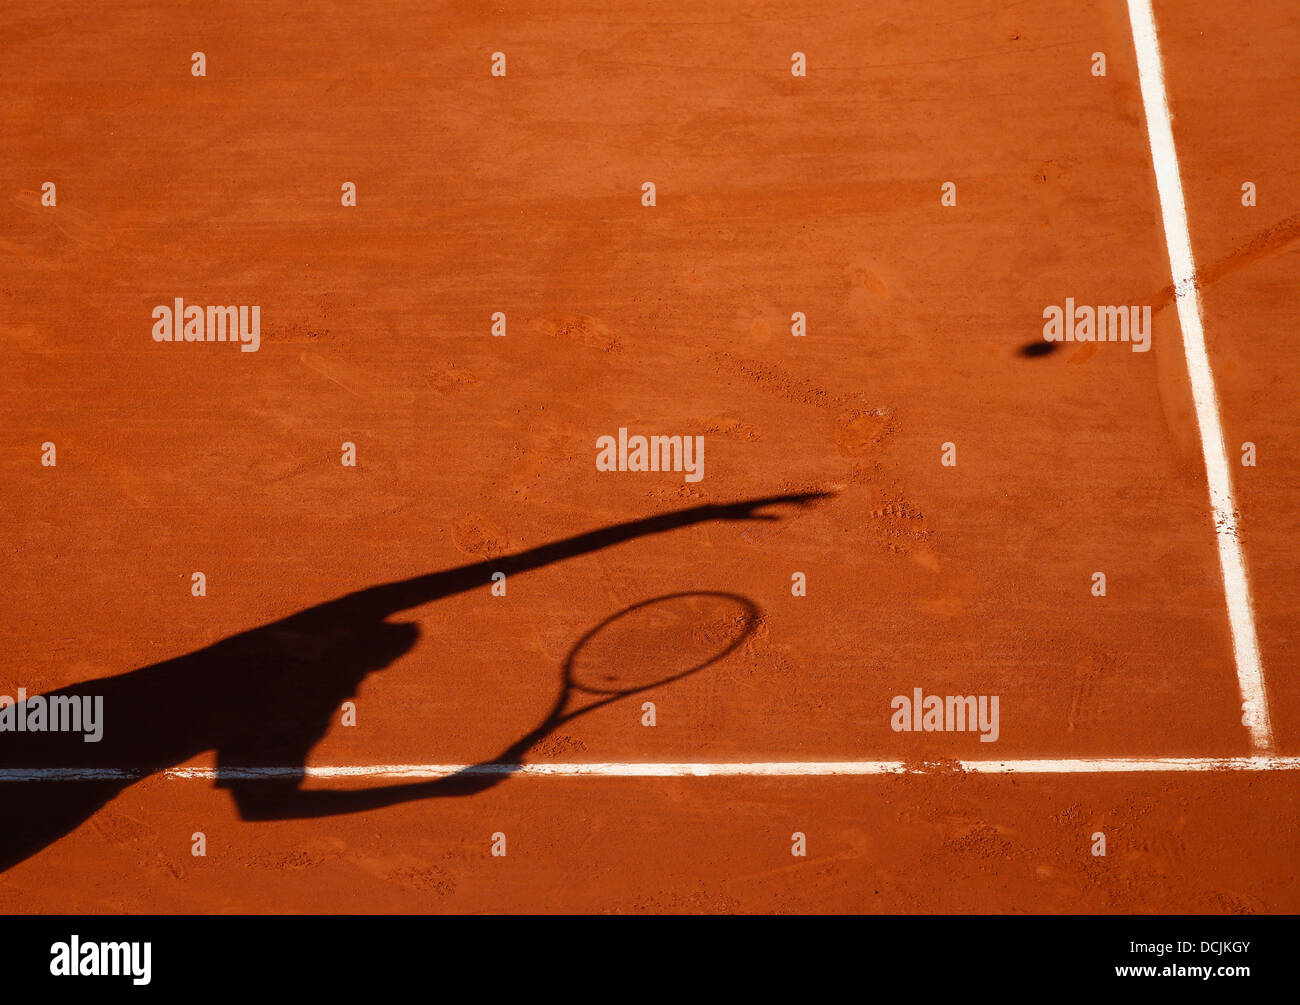 Shadow of a tennis player serving the ball. Stock Photo